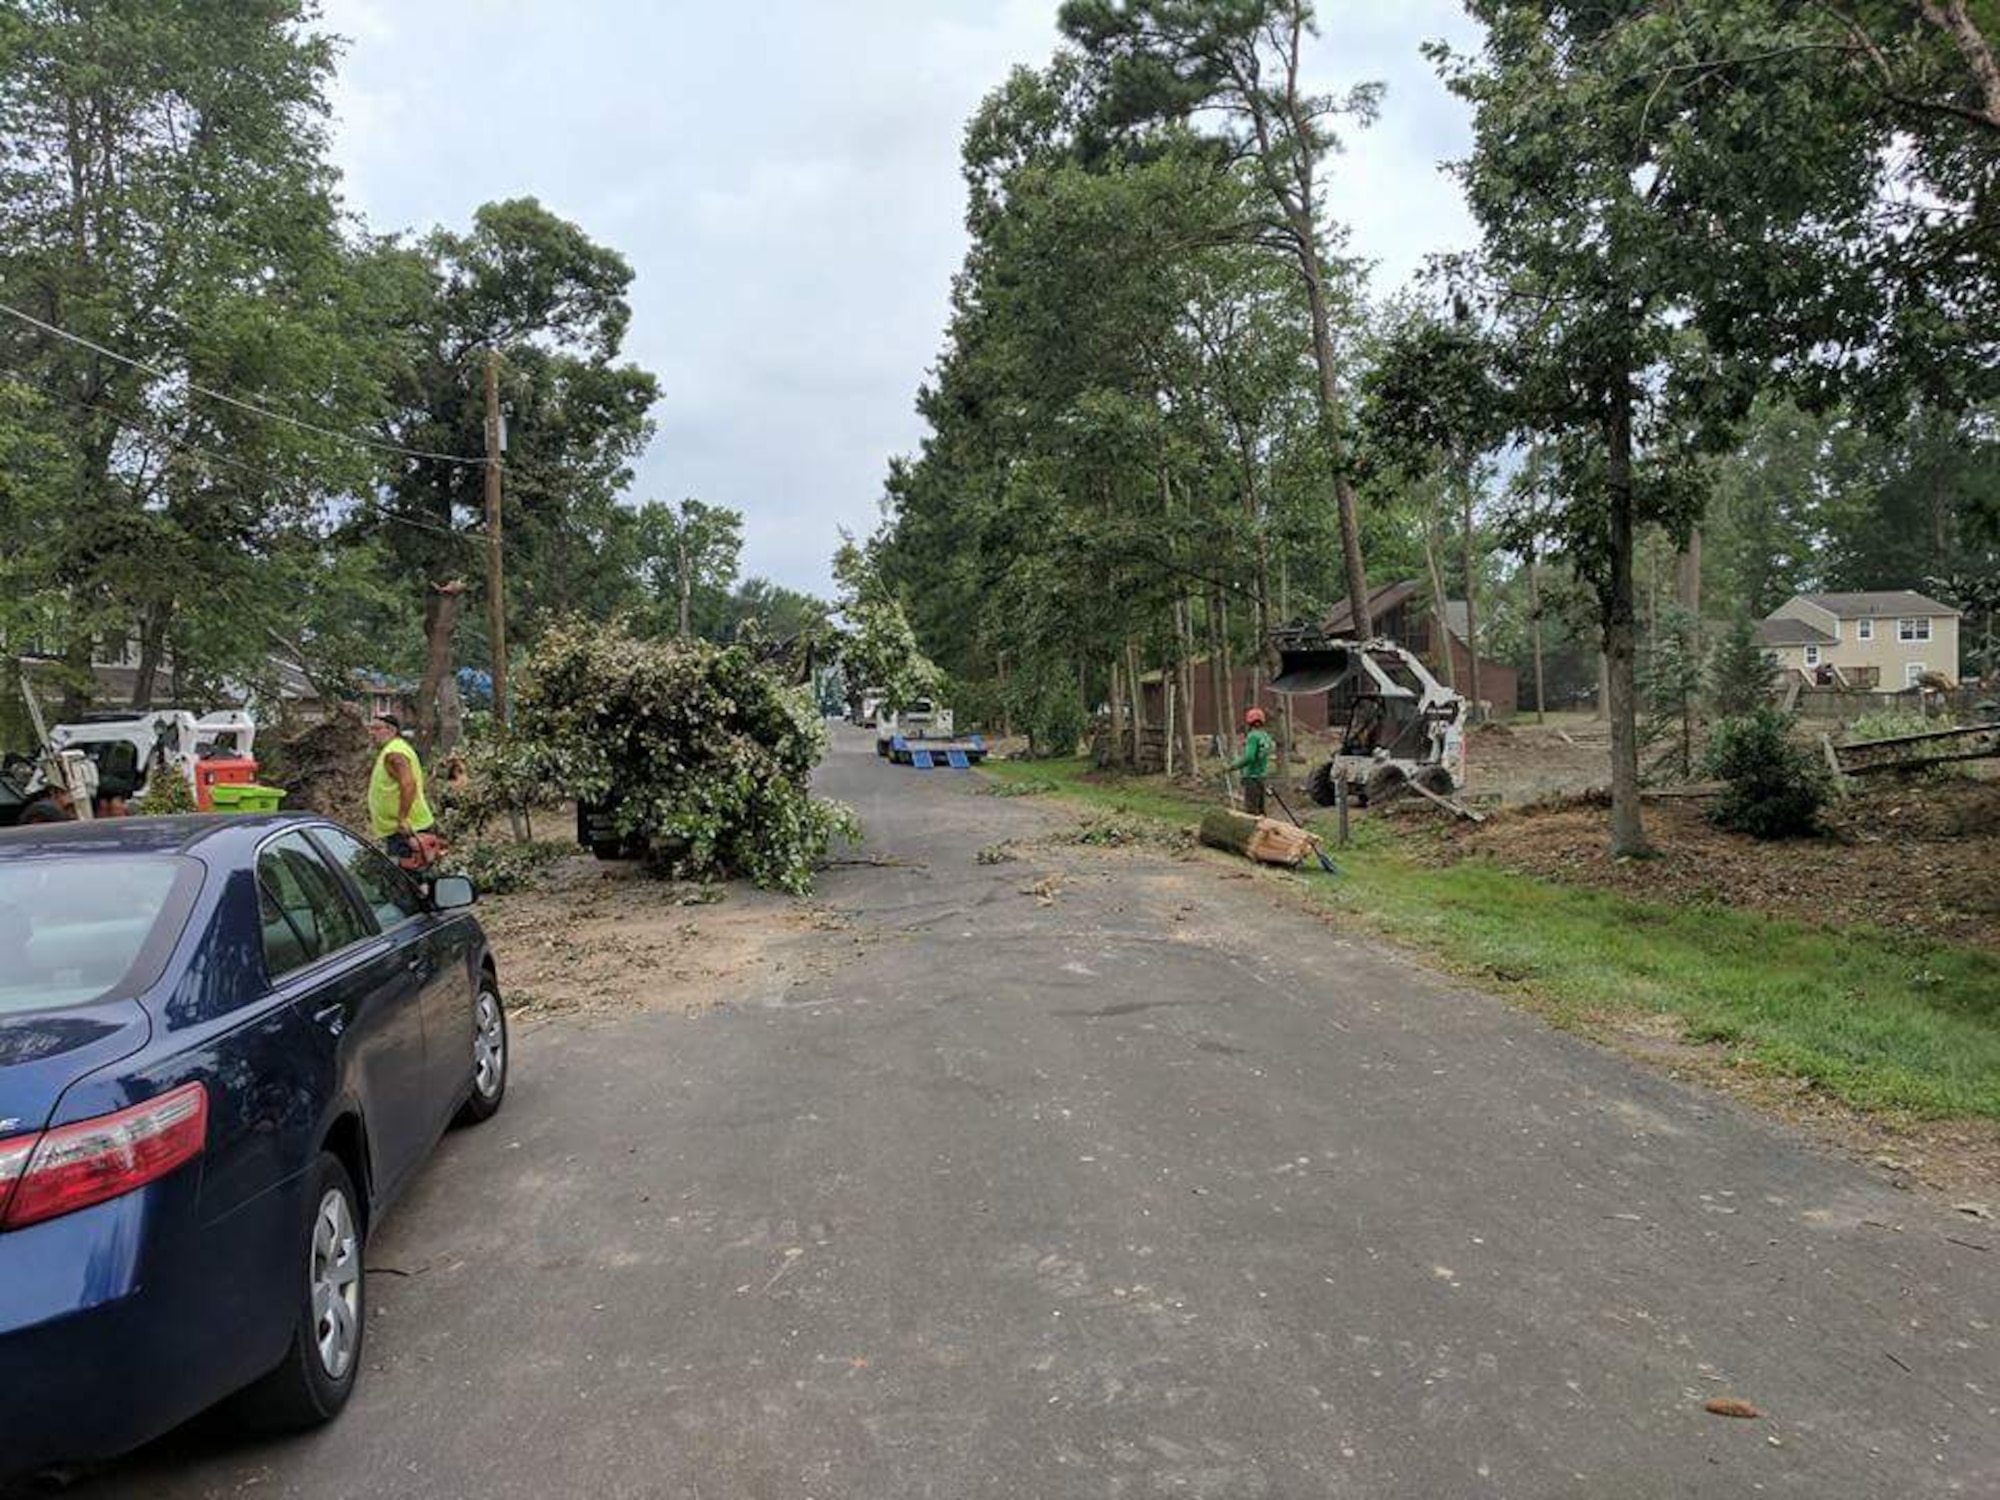 More than 9,000 homes and businesses on Kent Island were effected when an EF-2 tornado tore across Maryland’s Eastern shore July 24, 2017. The tornado produced winds up to 125 mph and destroyed several homes, tore roofs from buildings and left thousands of people without power. (Courtesy photo)